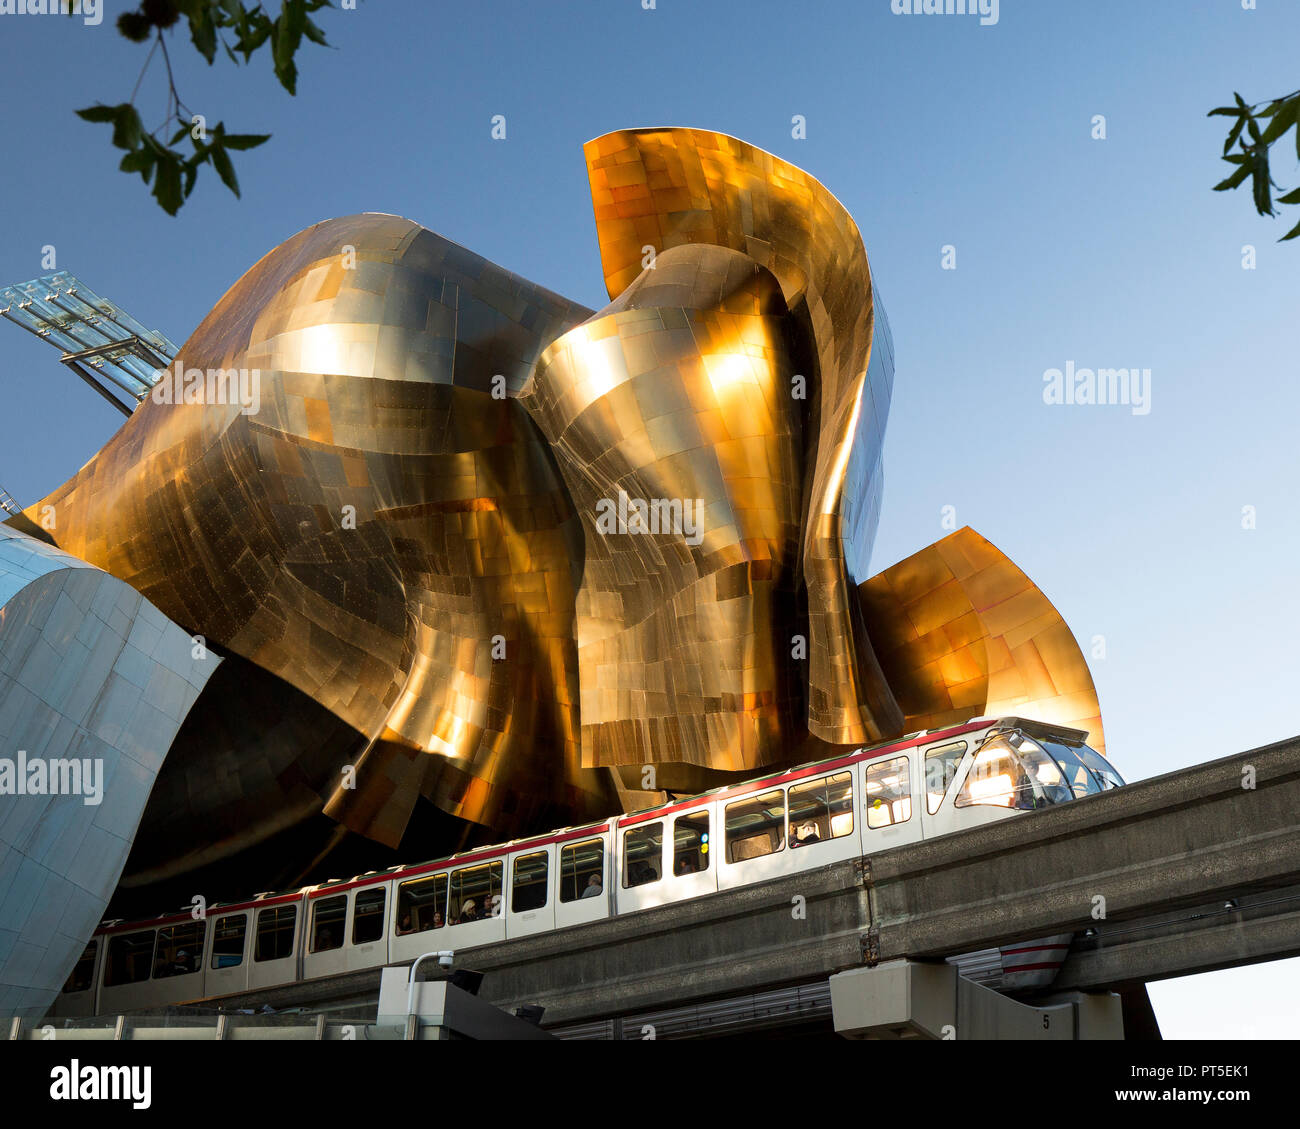 Seattle Monorail with MoPOP, Museum of Pop Culture. Stock Photo